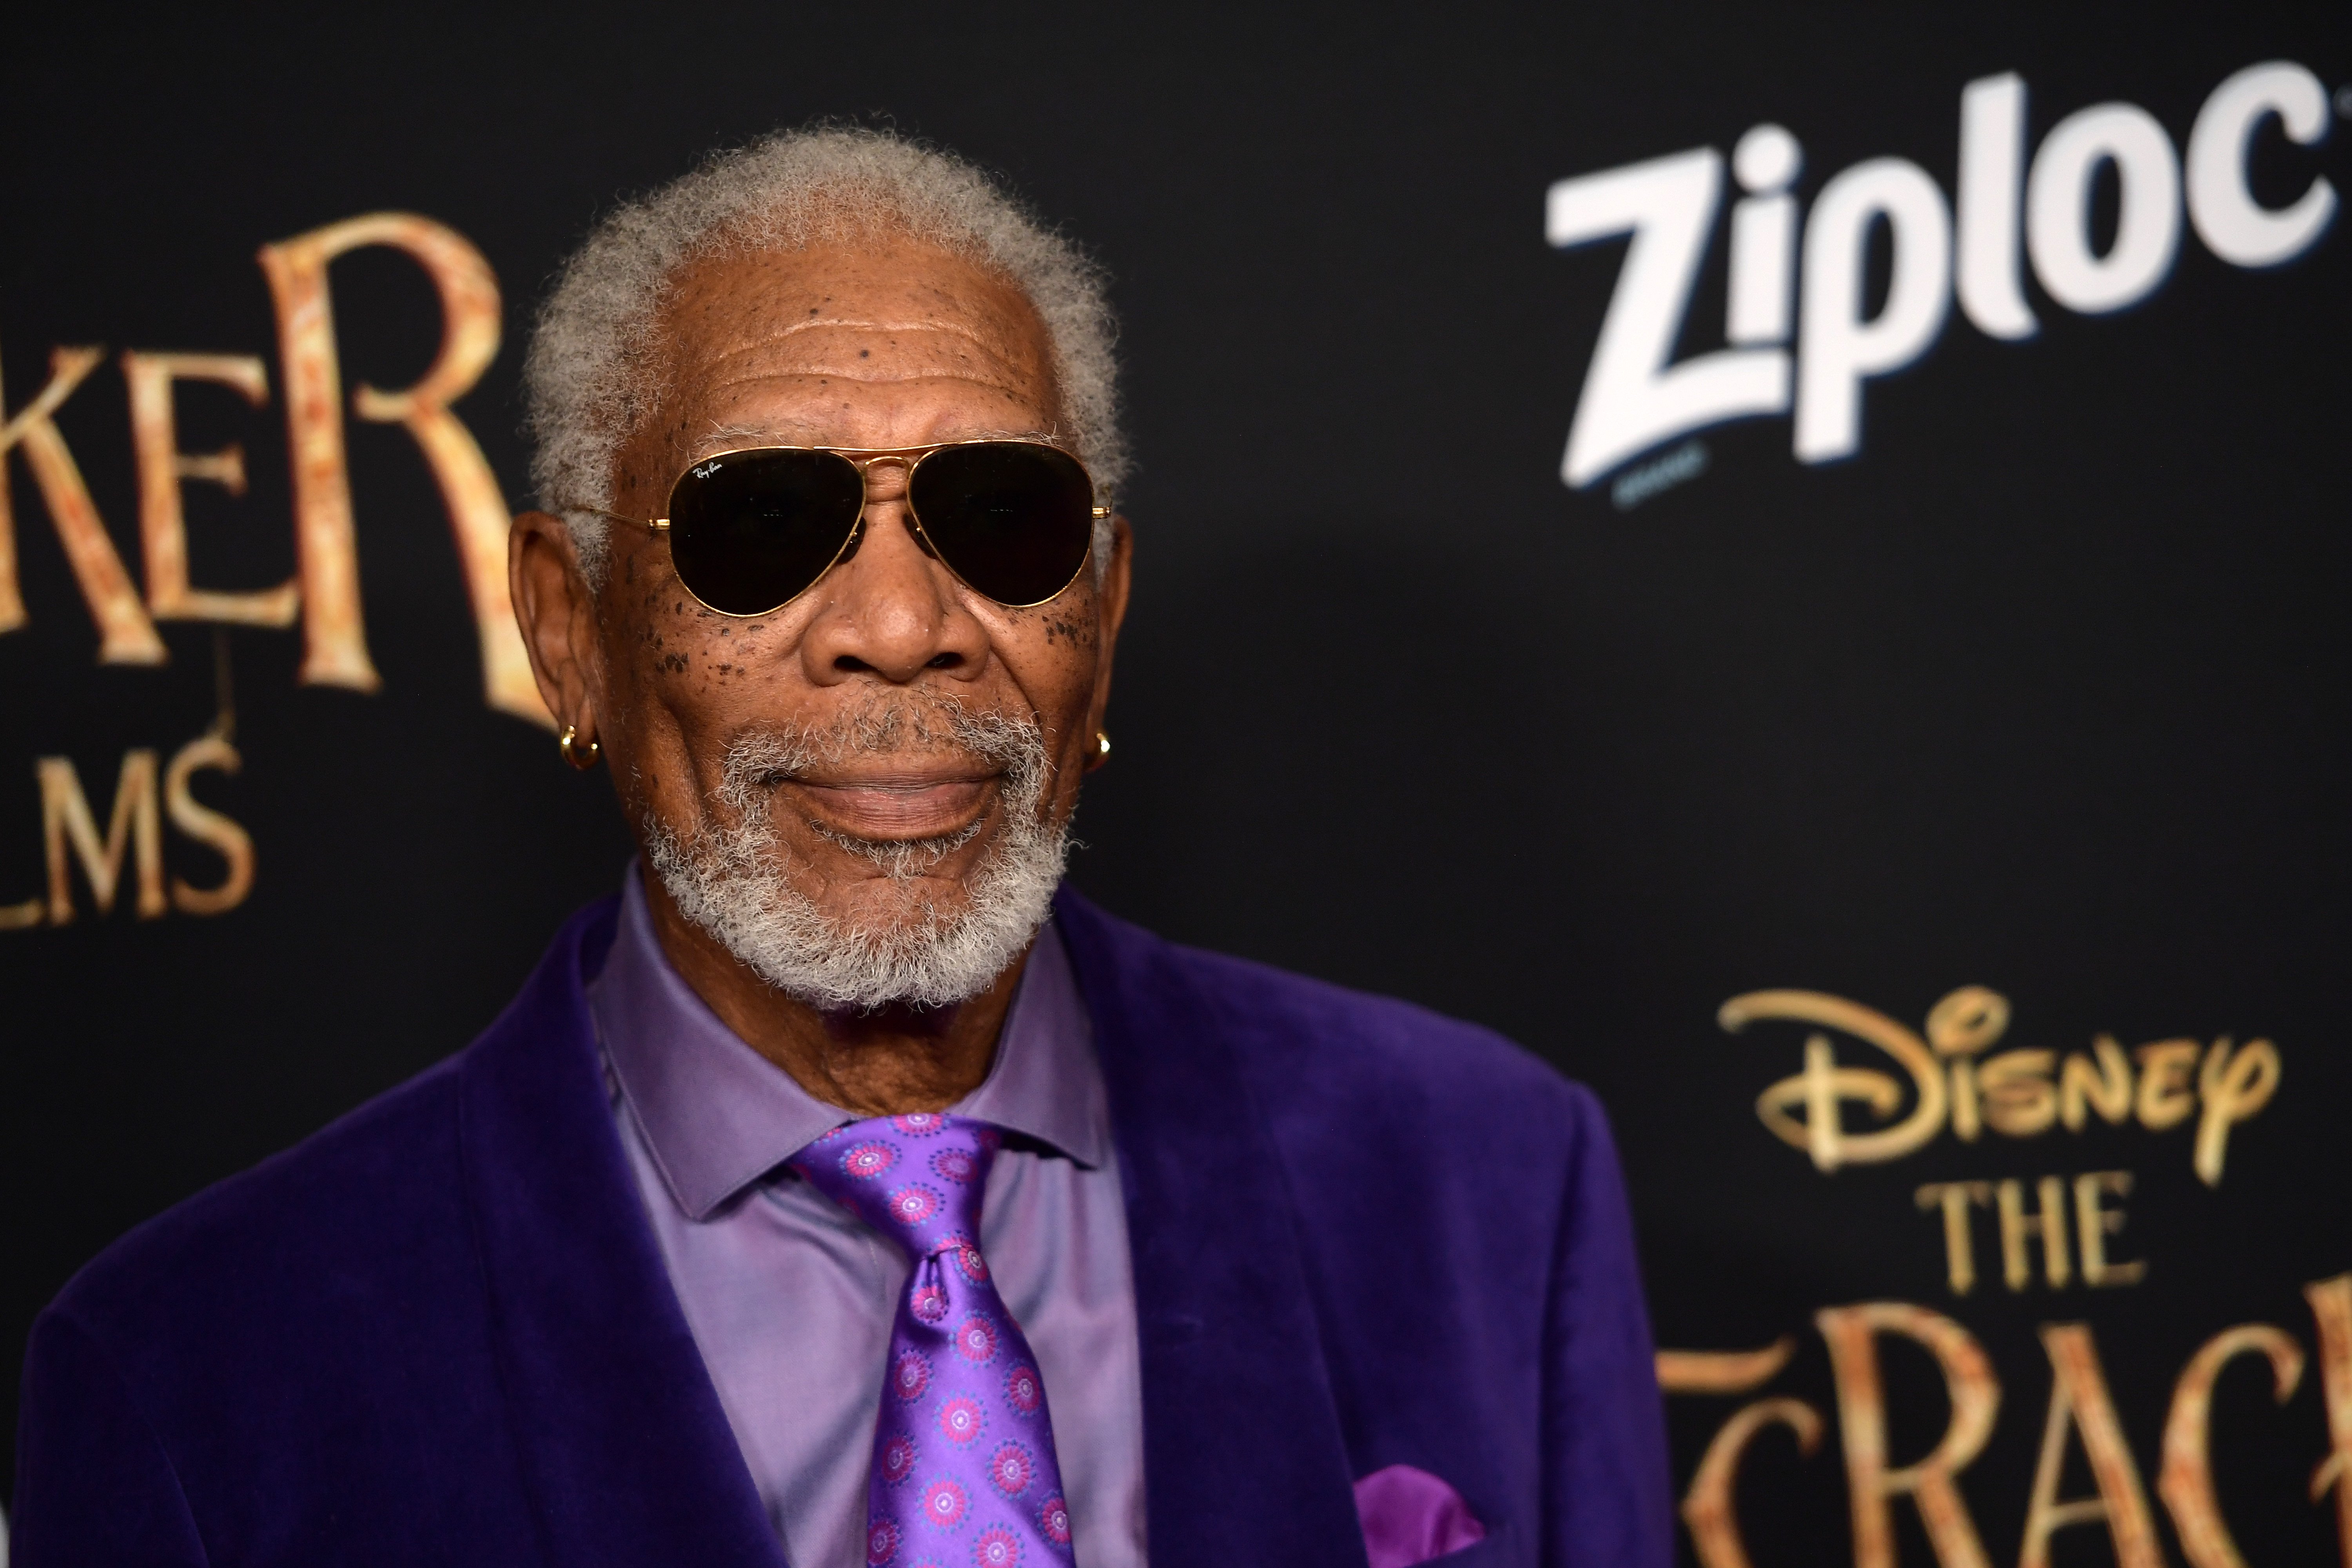 Morgan Freeman pictured at the premiere of Disney's "Nutcracker And The Four Realms," 2018, Hollywood, California. | Photo: Getty Images